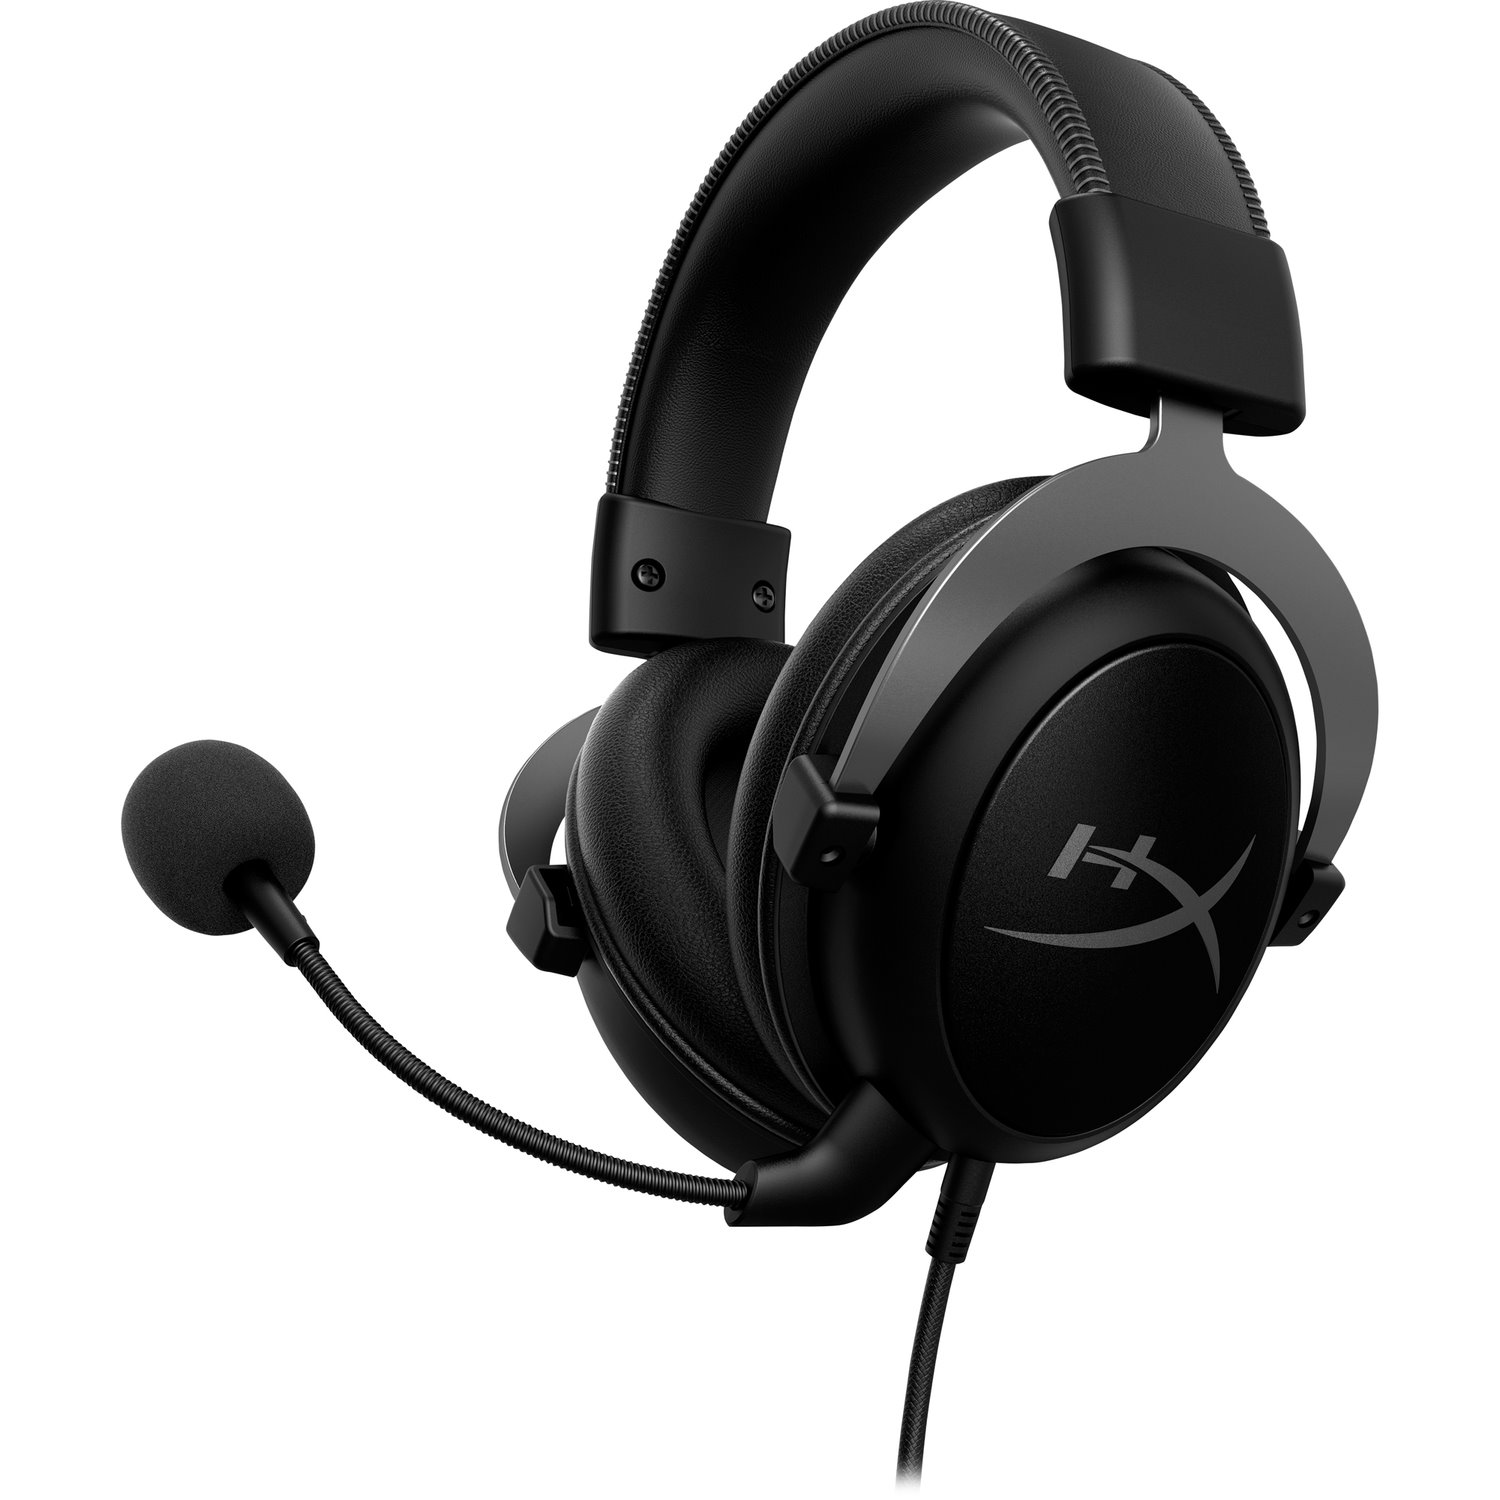 HyperX Cloud II Wired Over-the-ear, Over-the-head Stereo Gaming Headset - Gunmetal Black